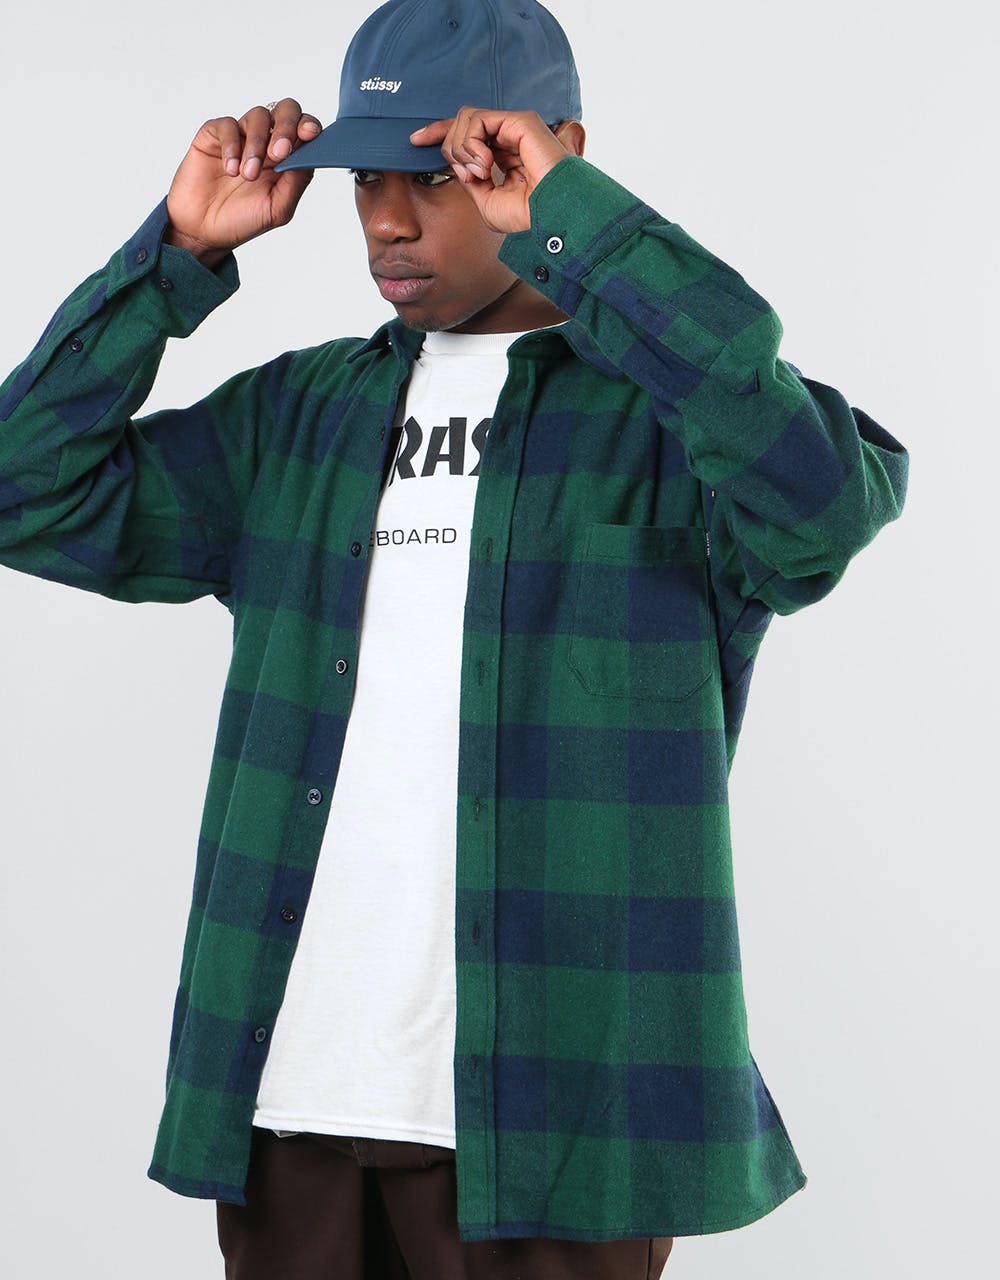 Route One Flannel Shirt - Green/Navy